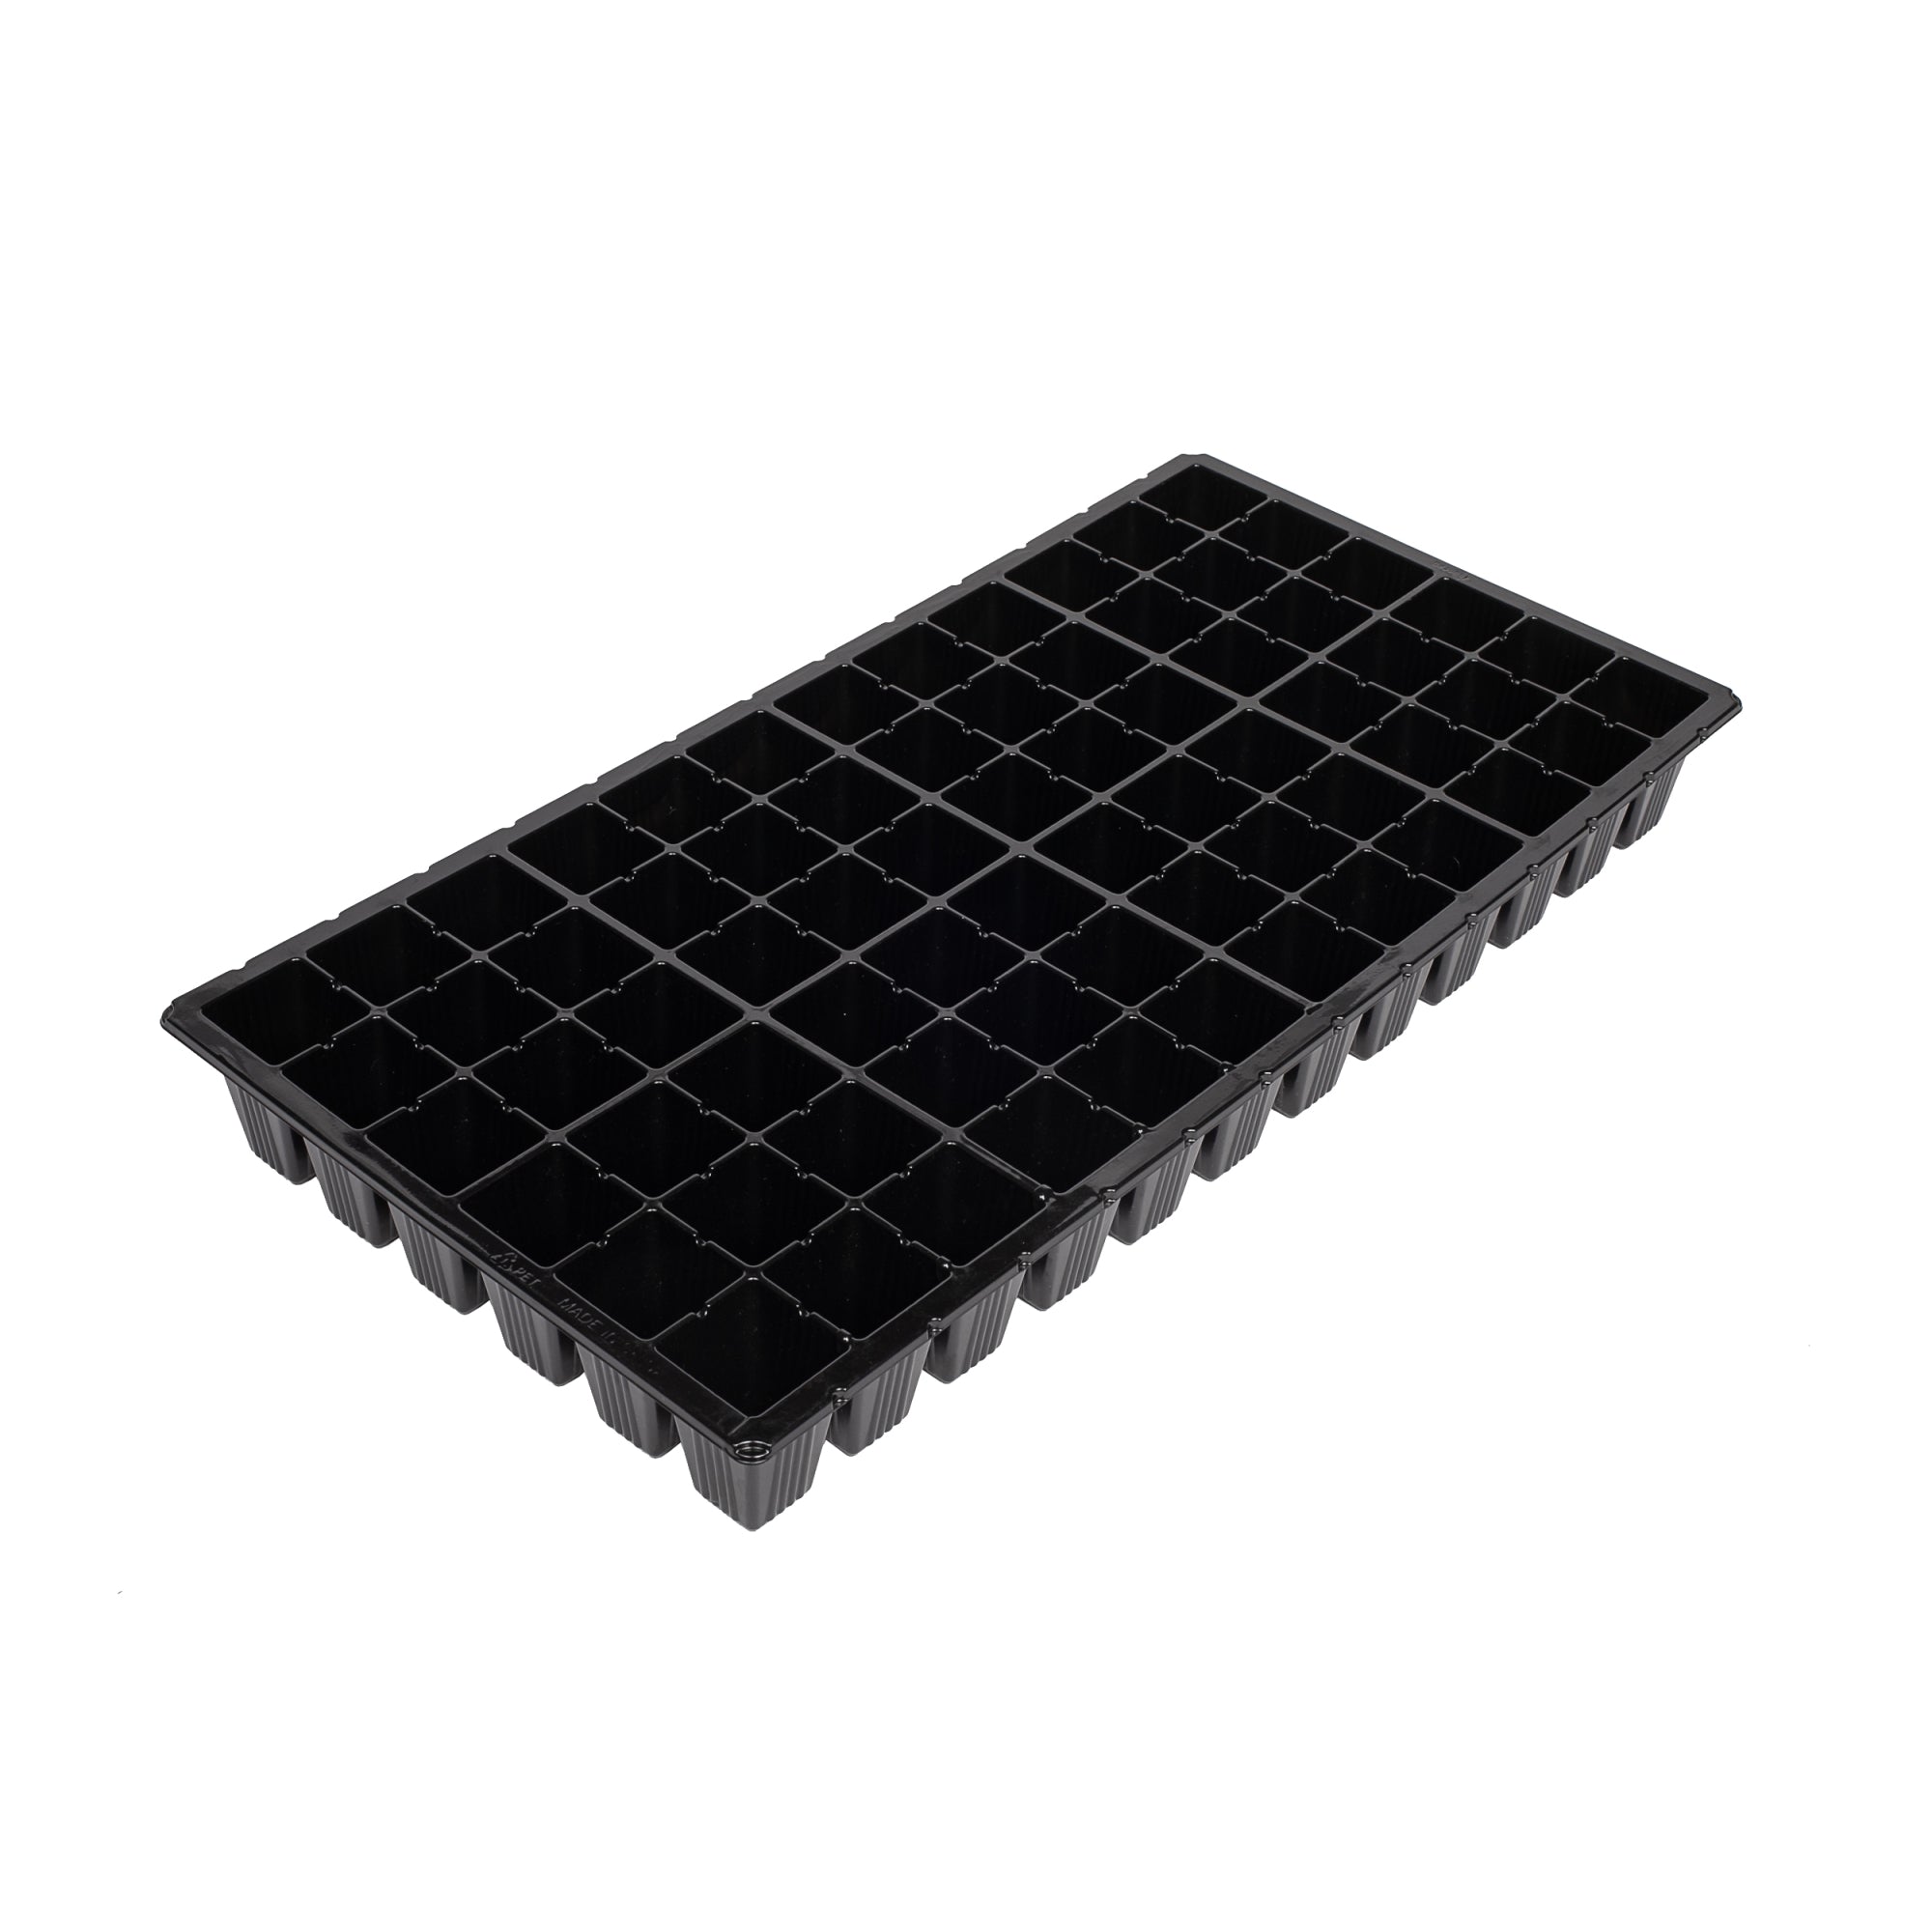 SunPack 21"x11" 72 Cell Square Insert, for Greenhouses, Gardening, and Seedlings, Black, Fits 10"x20" Trays